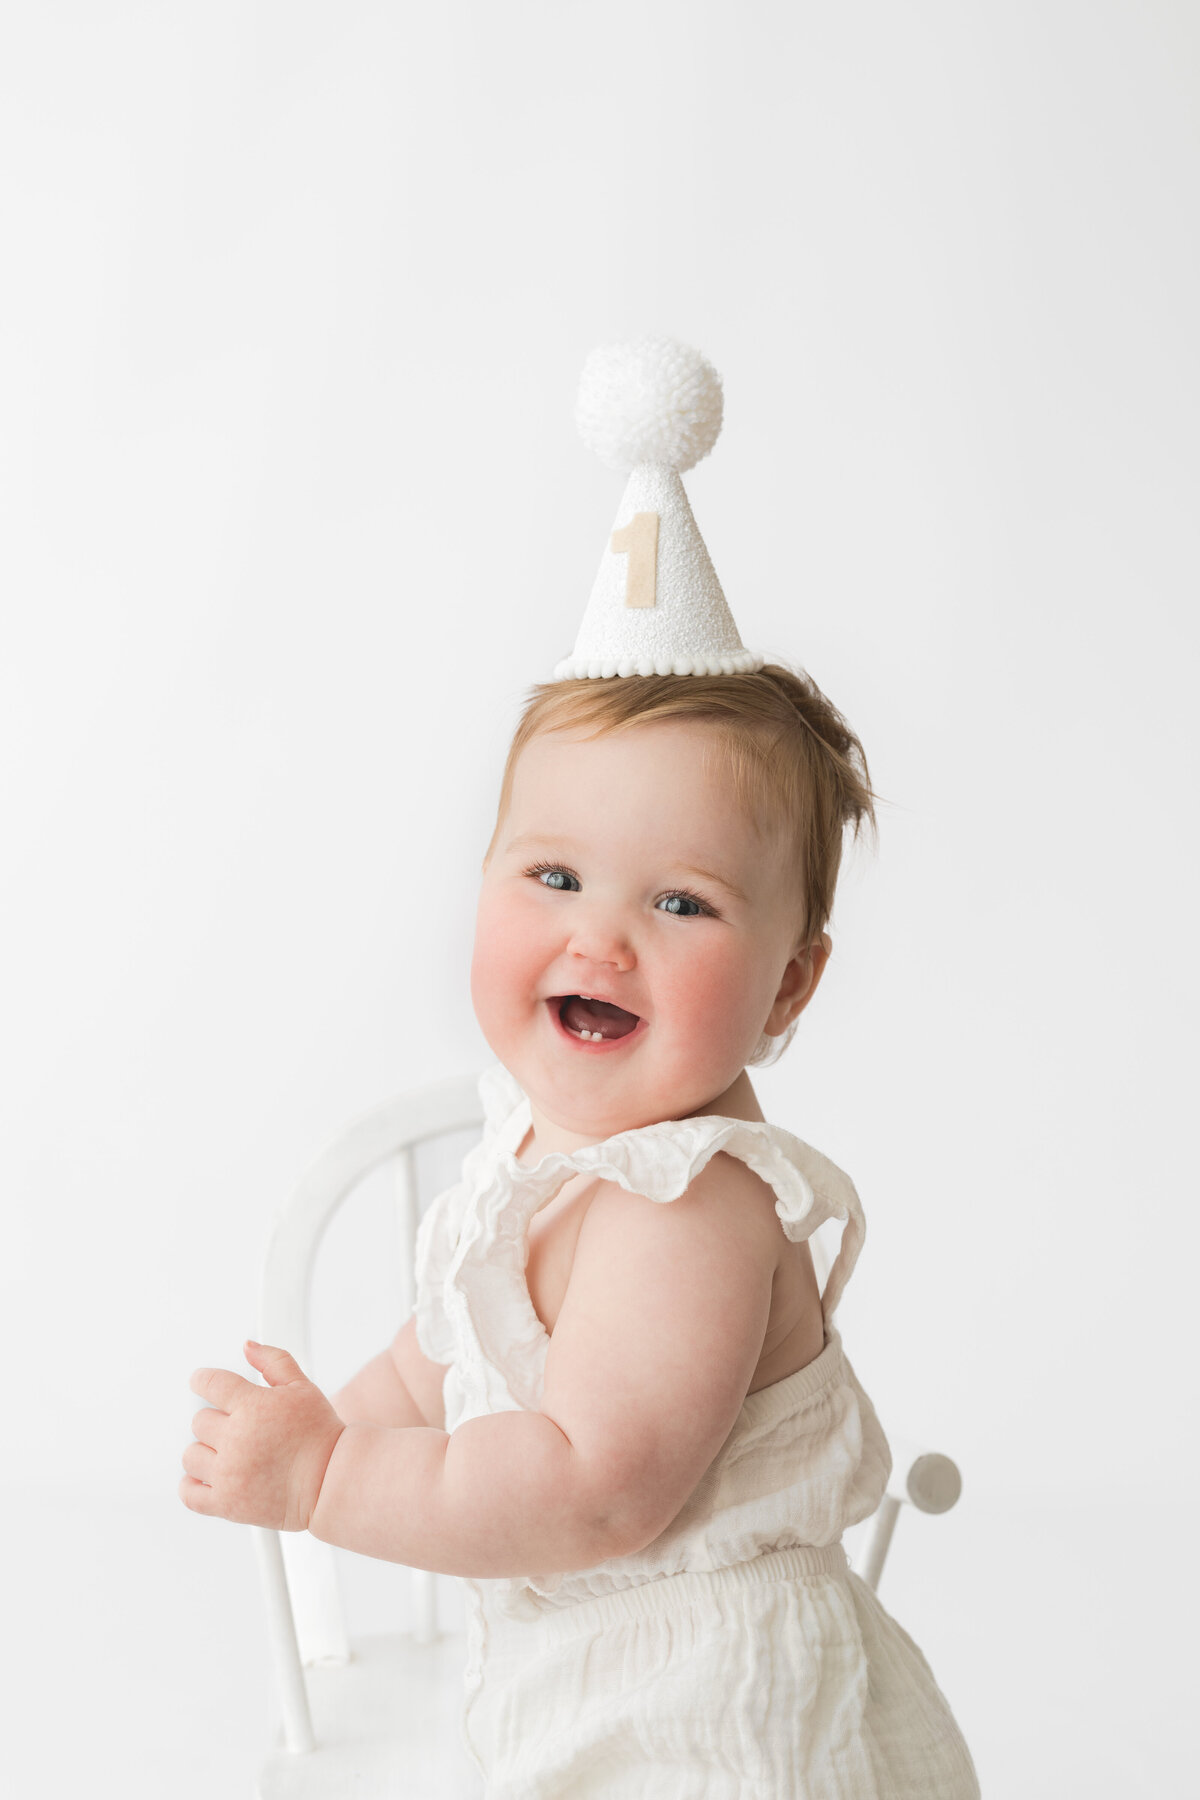 Hobart Baby wearing a party hat at a 1st birthday photoshoot